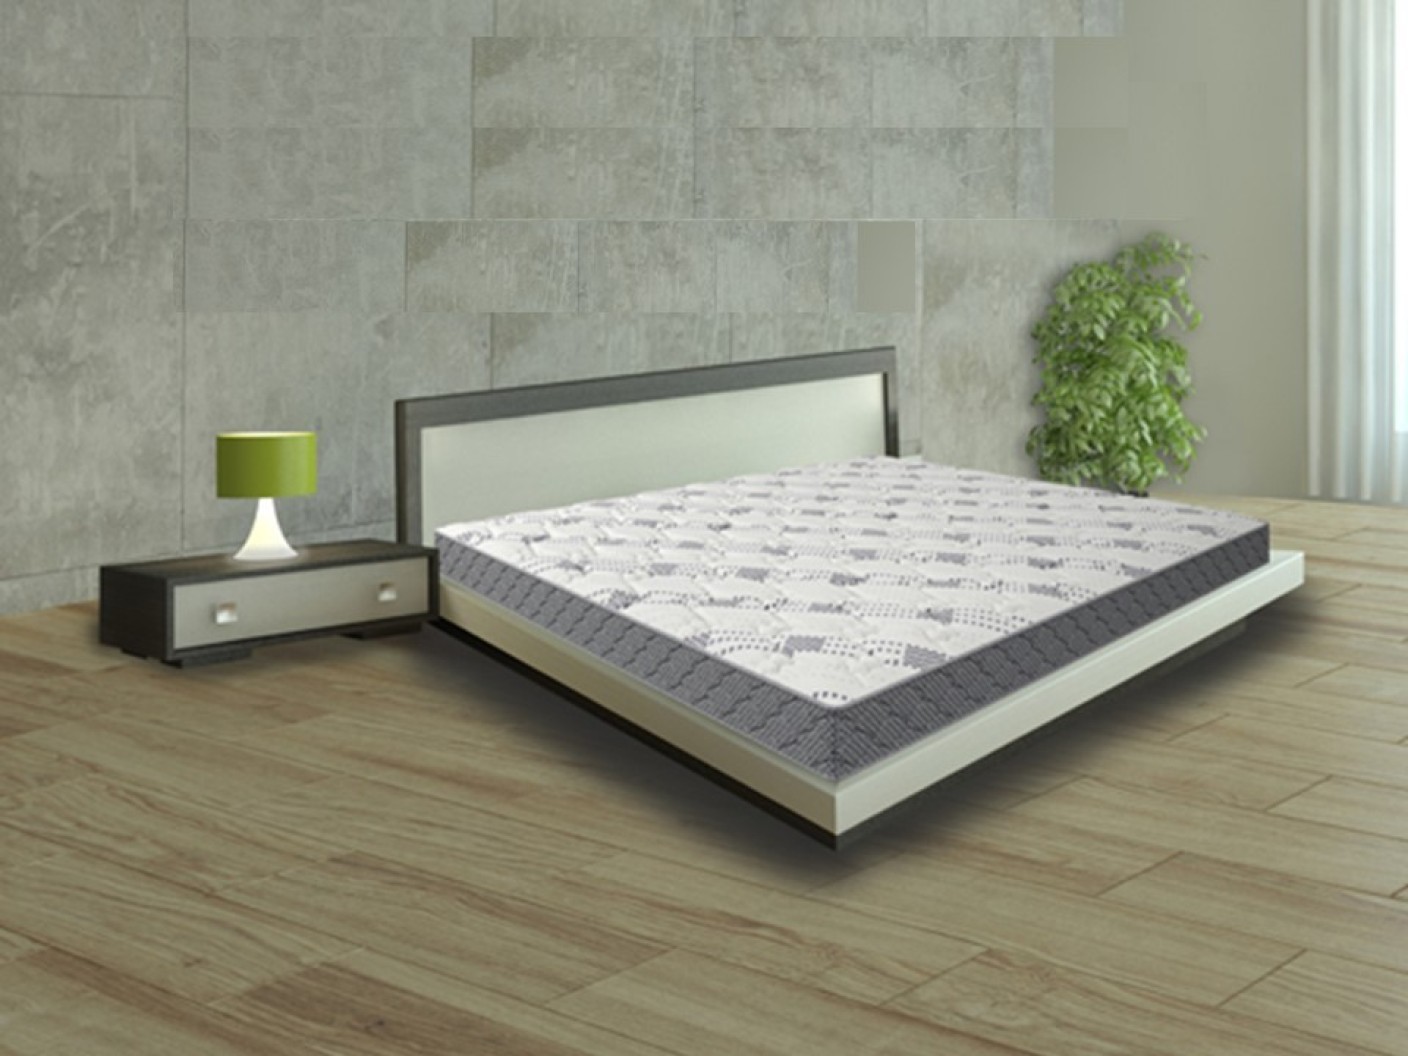 sleepwell bed mattress price in india